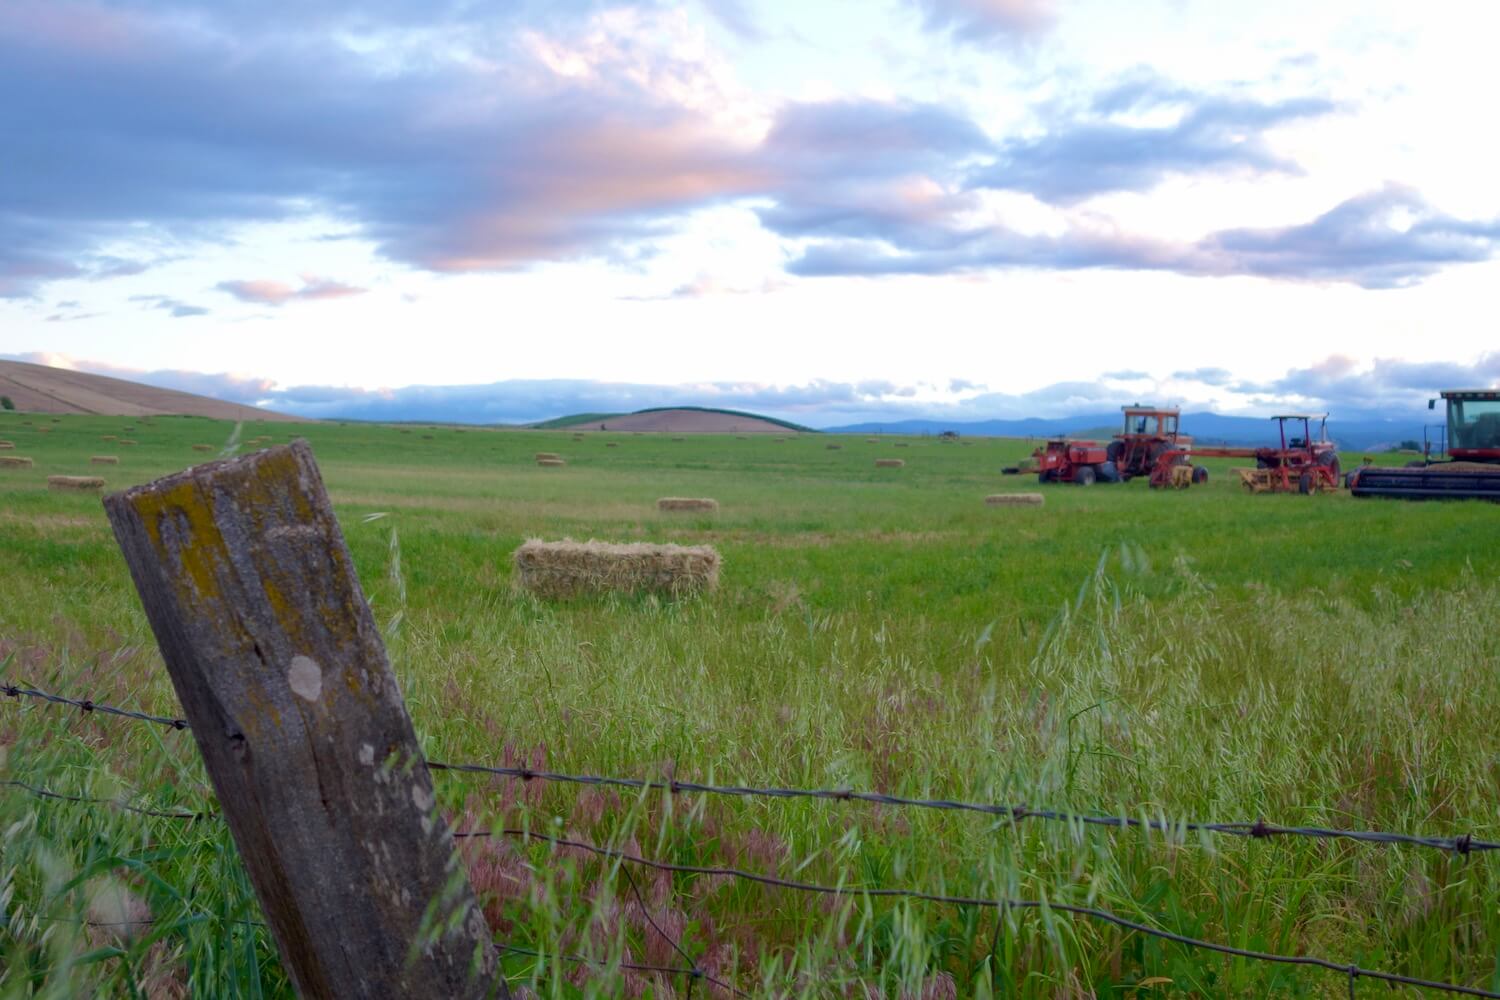 This sunset scene taken from the side of a county road in near Dufur, Oregon focuses on a wooden fence post while a hay bale sits in a grassy field.  There are several pieces of farm machinery in the background. 